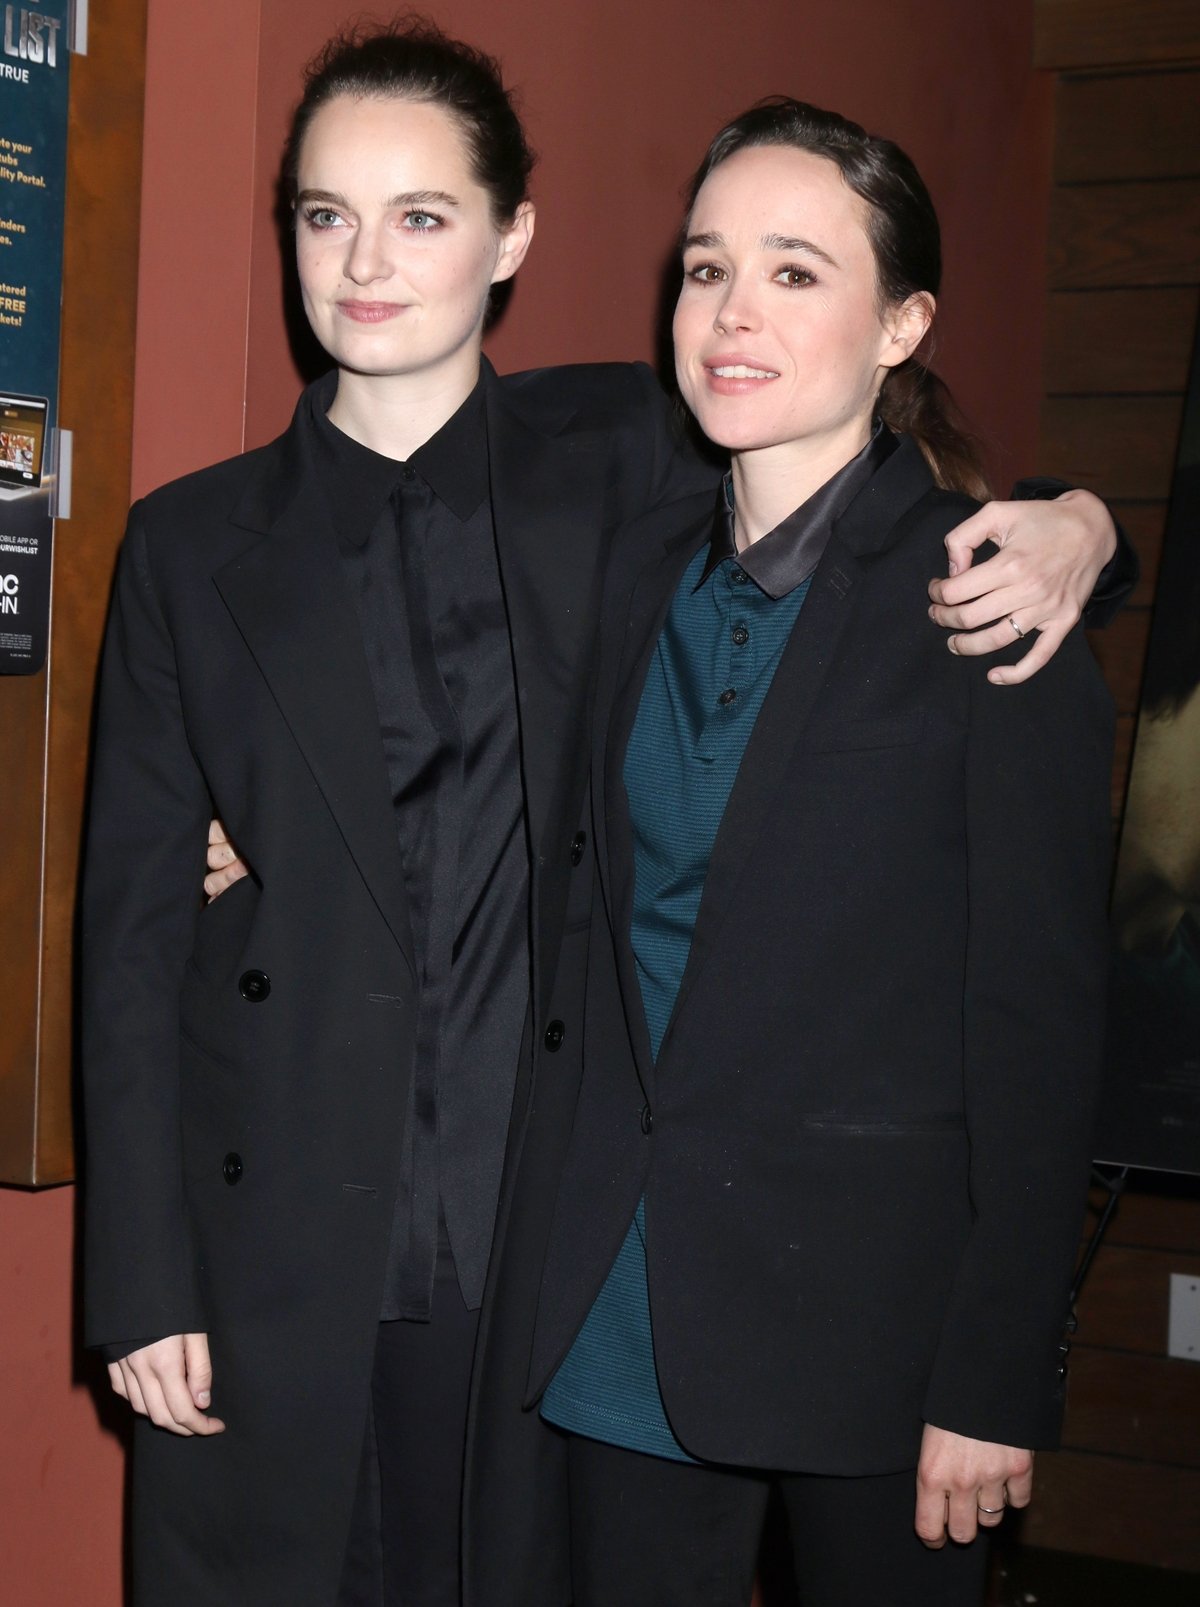 Elliot (Ellen) Page and Emma Portner first met on Instagram in 2017, married six months later, and divorced in 2021